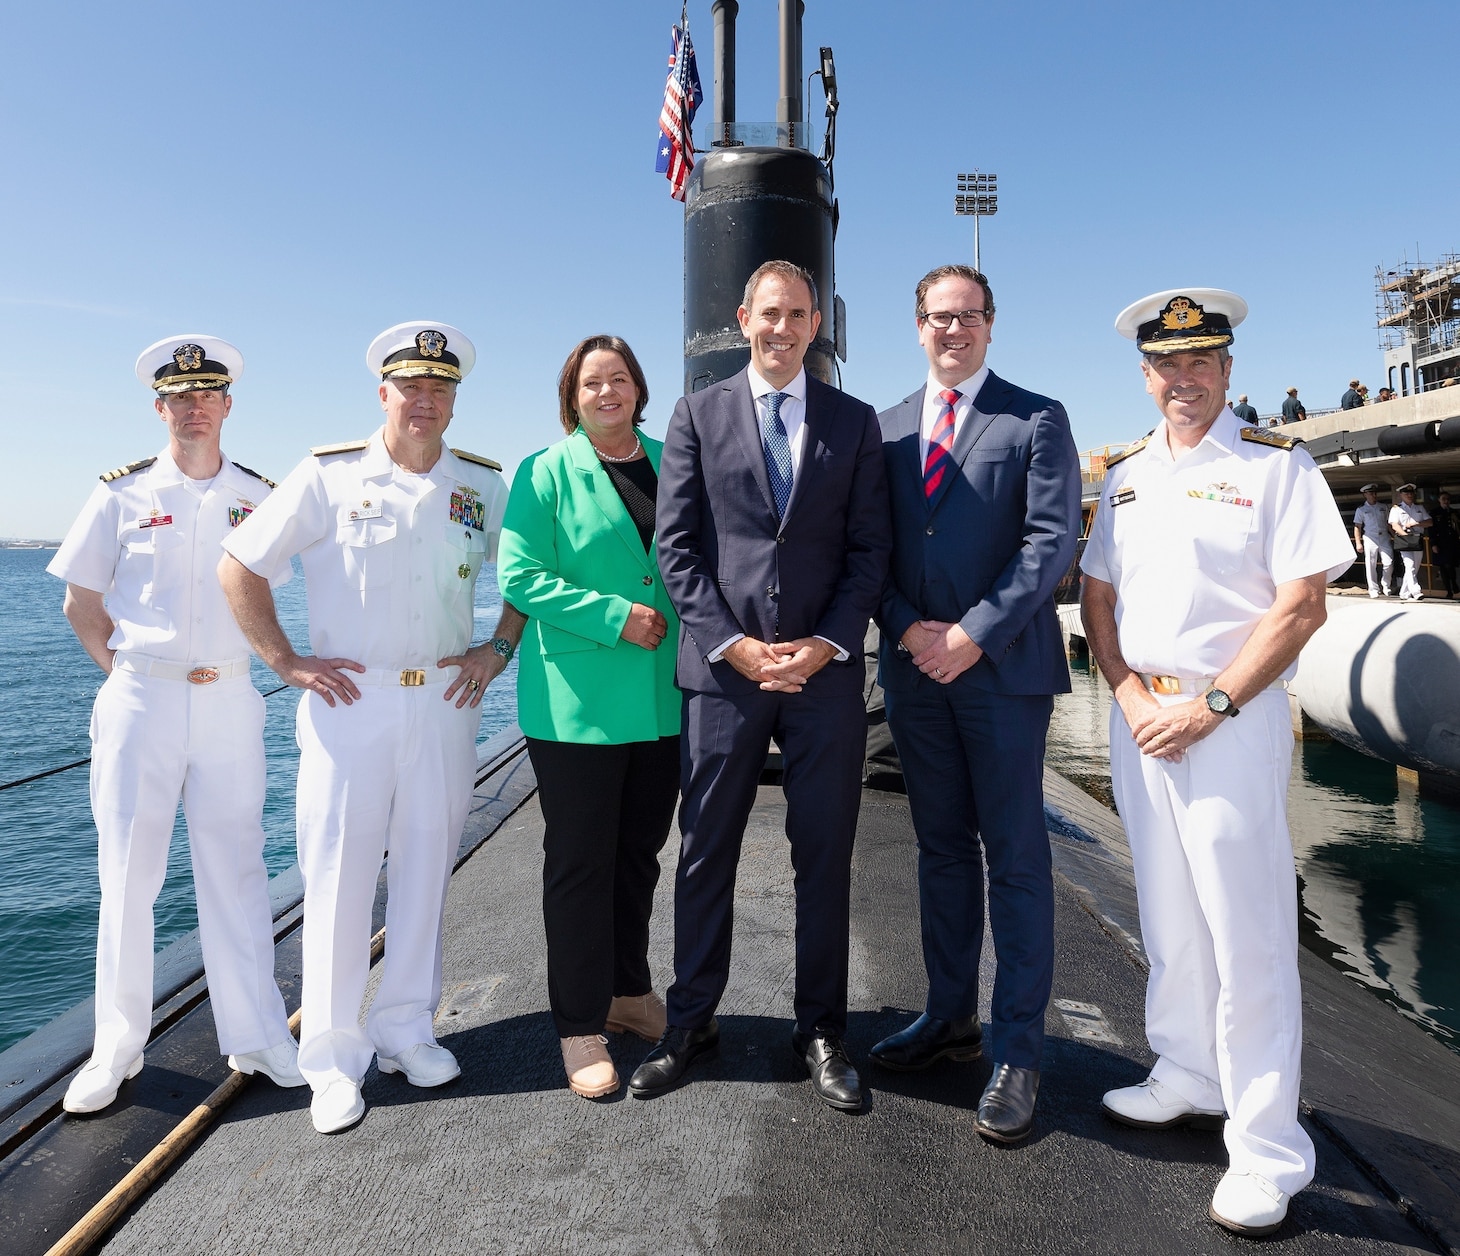 Australian Treasurer Jim Chalmers, center, poses for a photo onboard the Los Angeles-class fast-attack submarine USS Asheville (SSN 758) with WA Federal MPs Minister for Northern Australia and Resources Madeleine King, Minister for Defence Personnel and Veterans' Affairs Matt Keogh, Royal Australian Navy Rear Adm. Matt Buckley, Head of Capability, Nuclear Powered Submarine Task Force, right, Rear Adm. Rick Seif, commander, Submarine Group 7, second from left, and Cmdr. Tom Dixon, Asheville’s commanding officer following a tour, March 14. Asheville conducted multiple tours for distinguished visitors during a routine port visit to HMAS Stirling, Western Australia to enhance interoperability and communication, and strengthen relationships with the Royal Australian Navy.